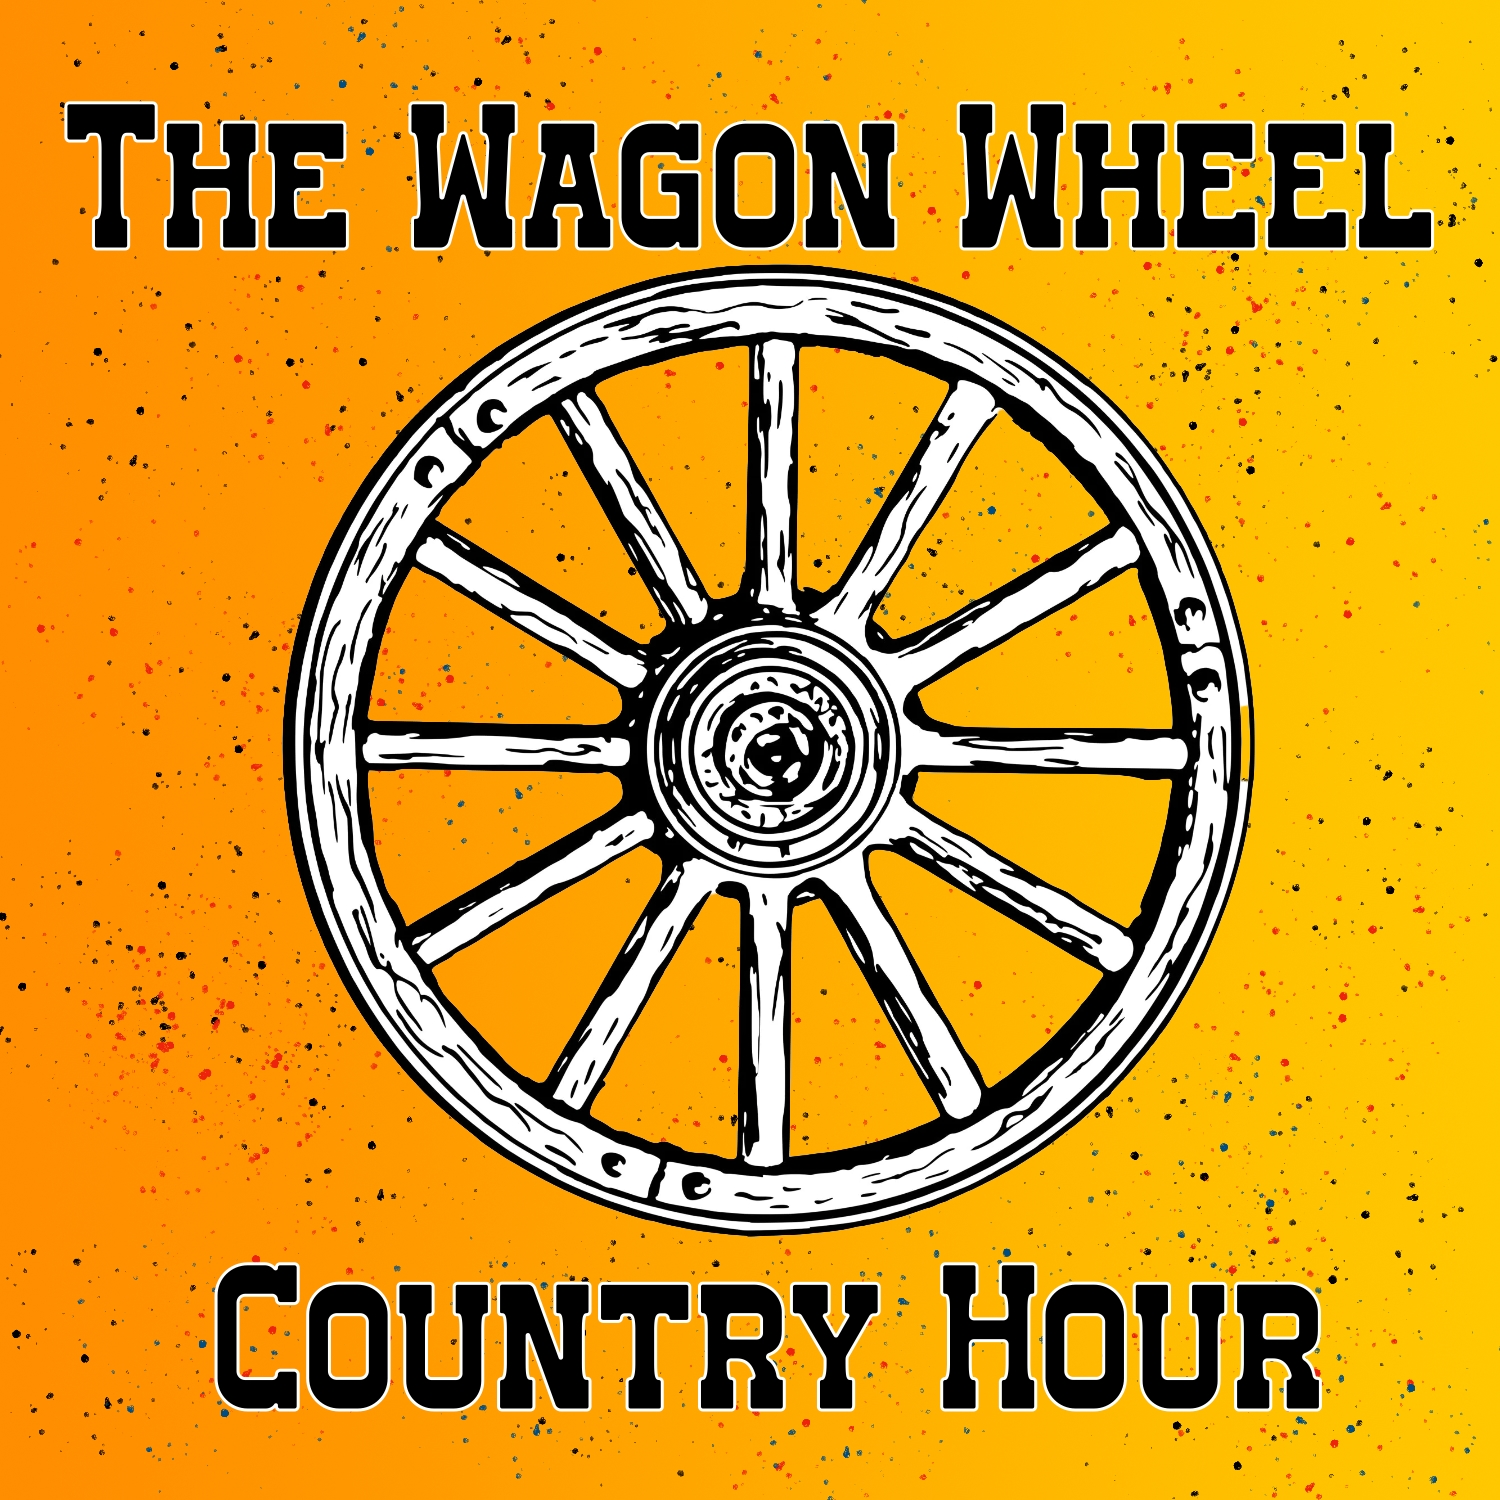 Art for The Wagon Wheel Country Hour by Anti Gravity Radio